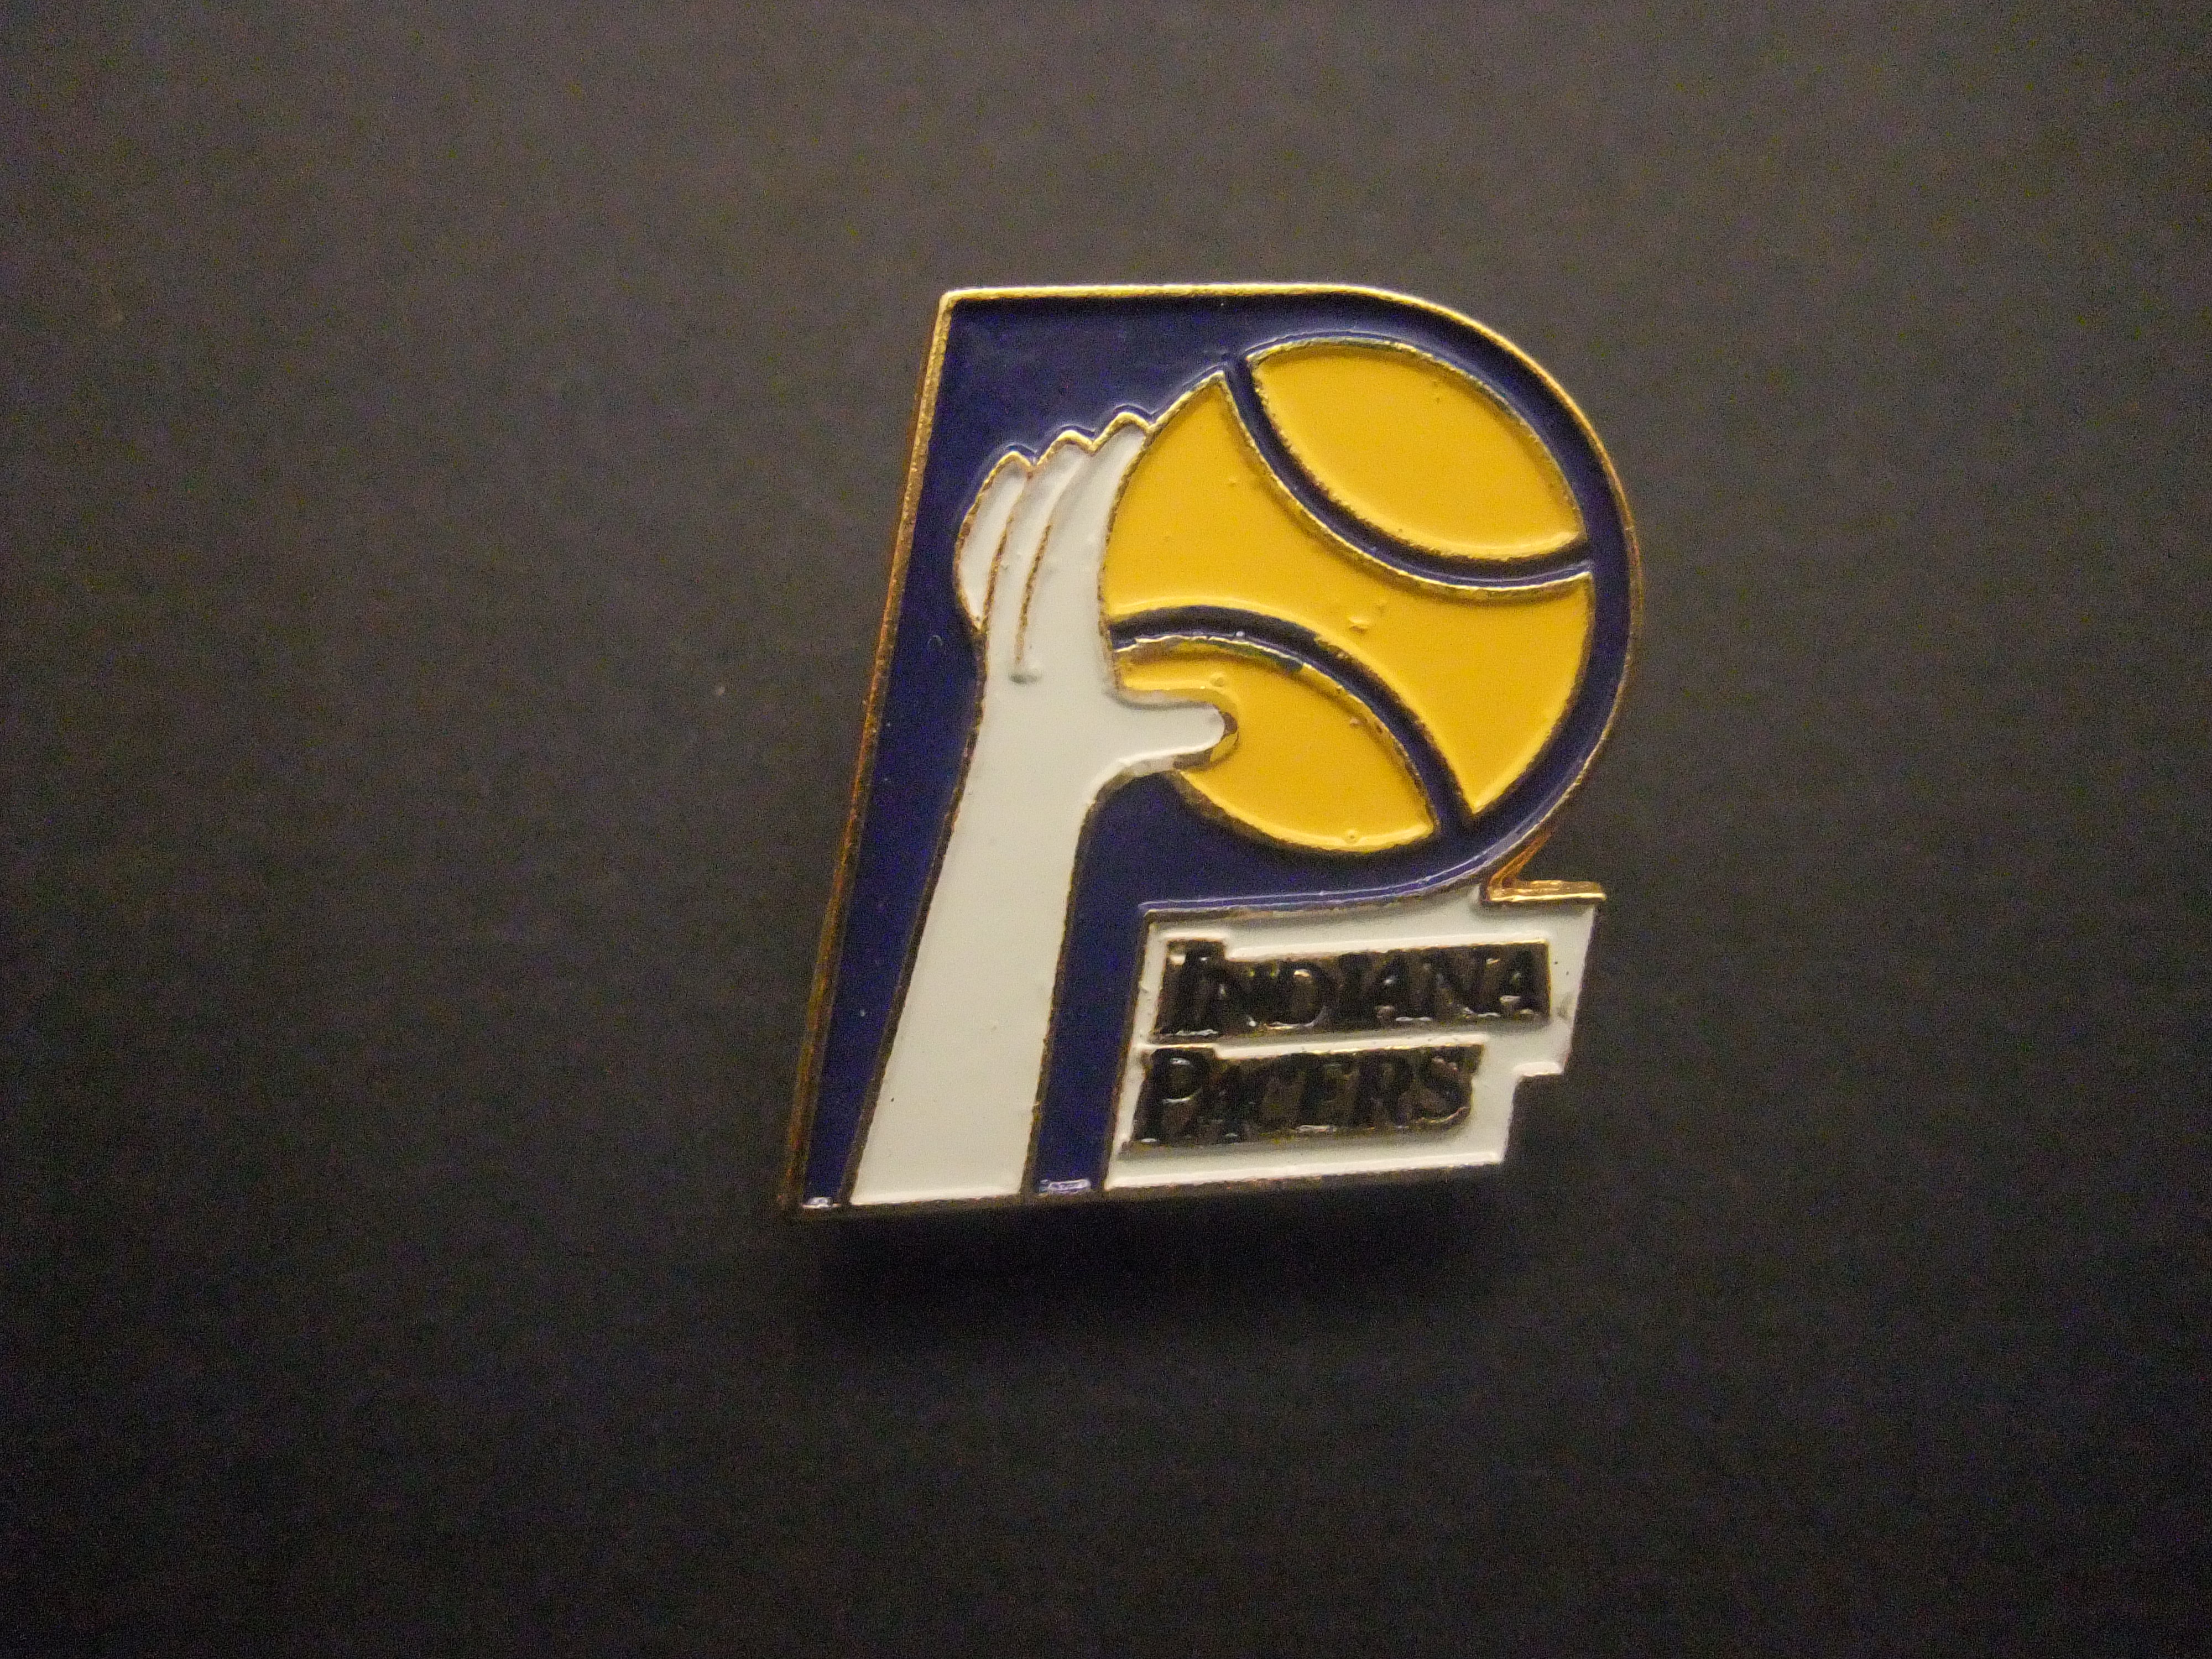 Indiana Pacers Basketbalteam Indianapolis